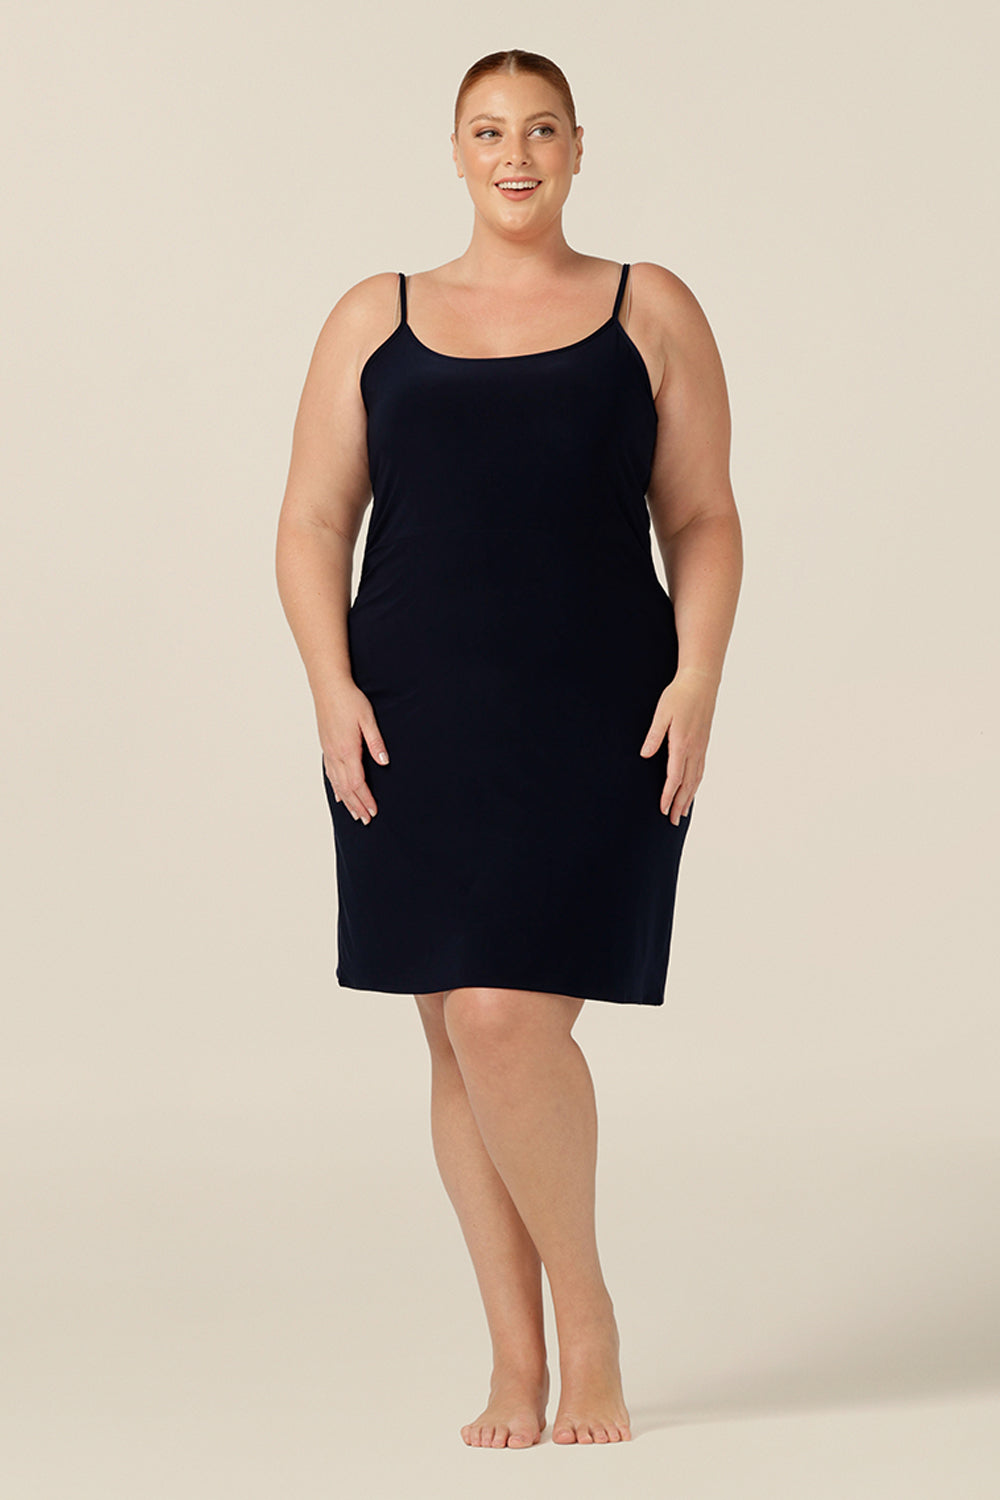 plus size slip dress for lounge wear - size 18 woman wears a navy, mini-length slip, shown with a scoop neckline and thin straps.. A reversible slip, this under garment can have a V-neck or a scoop neck to give a smooth layer under dresses and skirts.